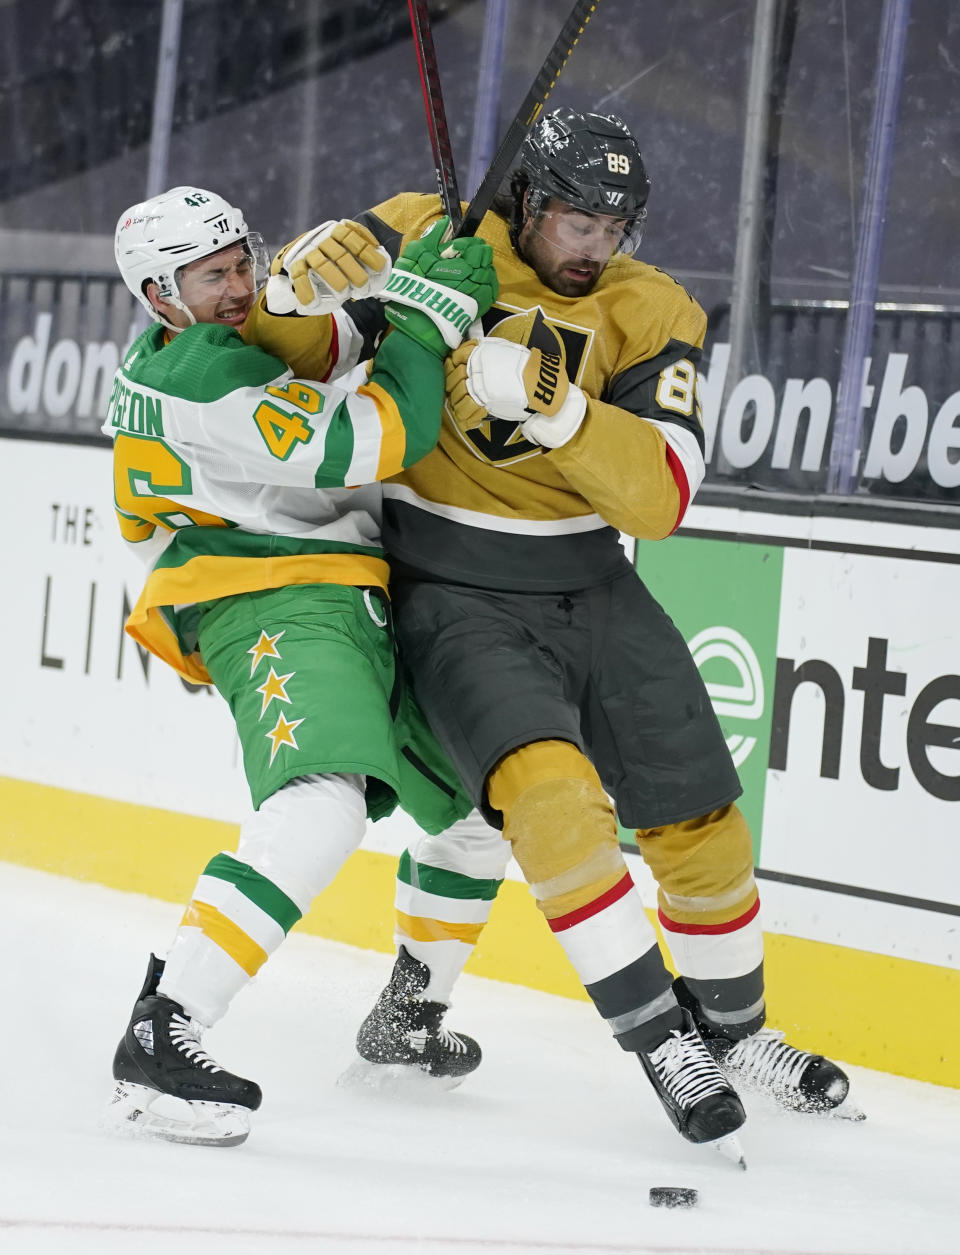 Minnesota Wild defenseman Jared Spurgeon (46) vies for the puck with Vegas Golden Knights right wing Alex Tuch (89) during the second period of an NHL hockey game Wednesday, March 3, 2021, in Las Vegas. (AP Photo/John Locher)